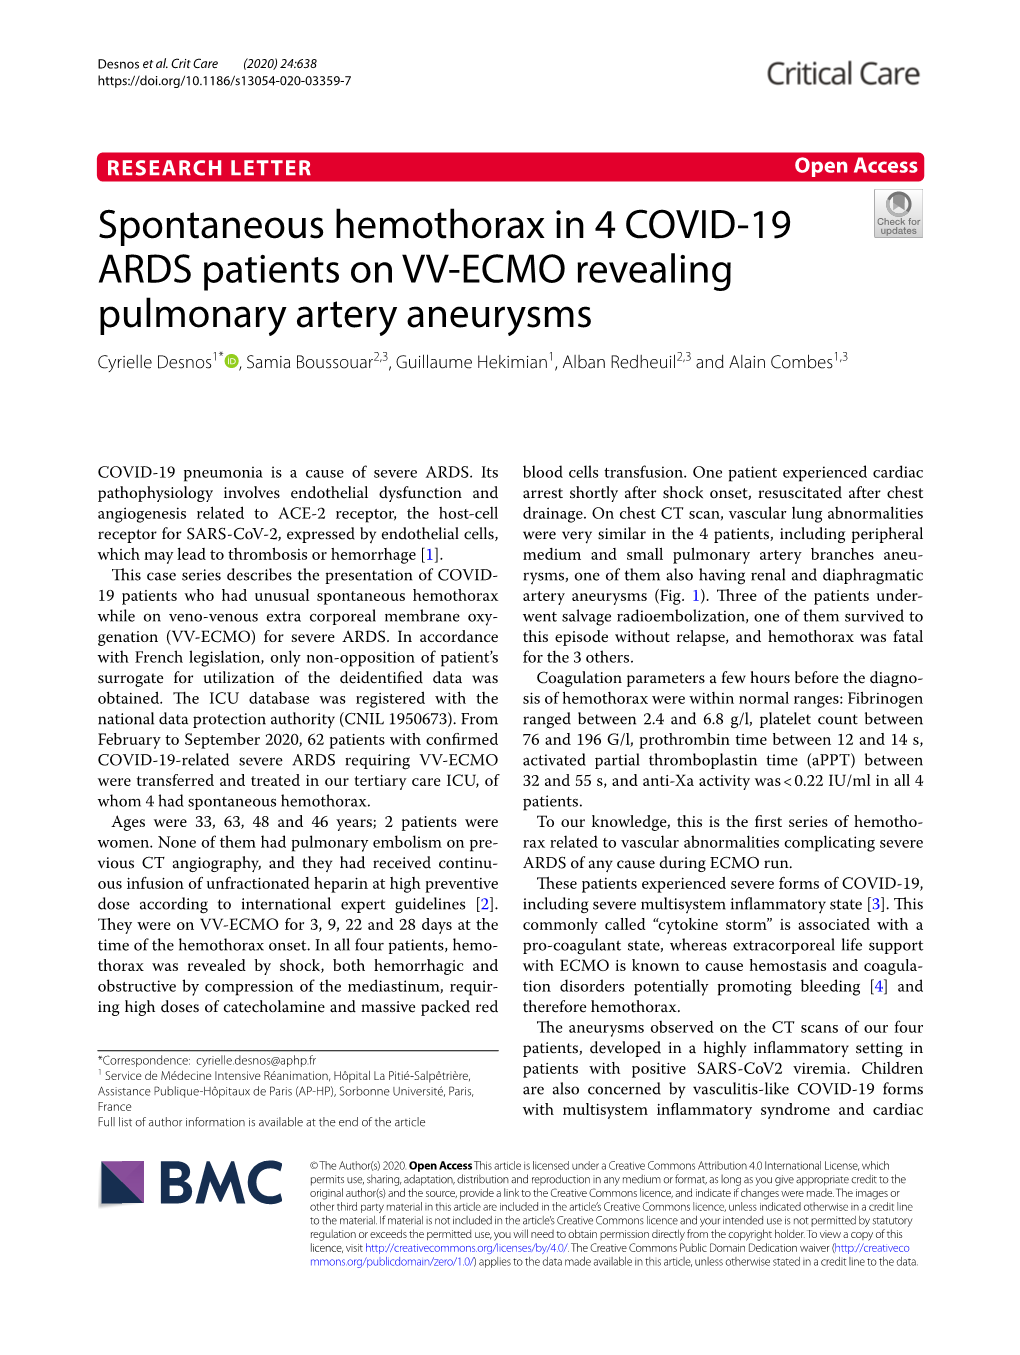 Spontaneous Hemothorax in 4 COVID-19 ARDS Patients on VV